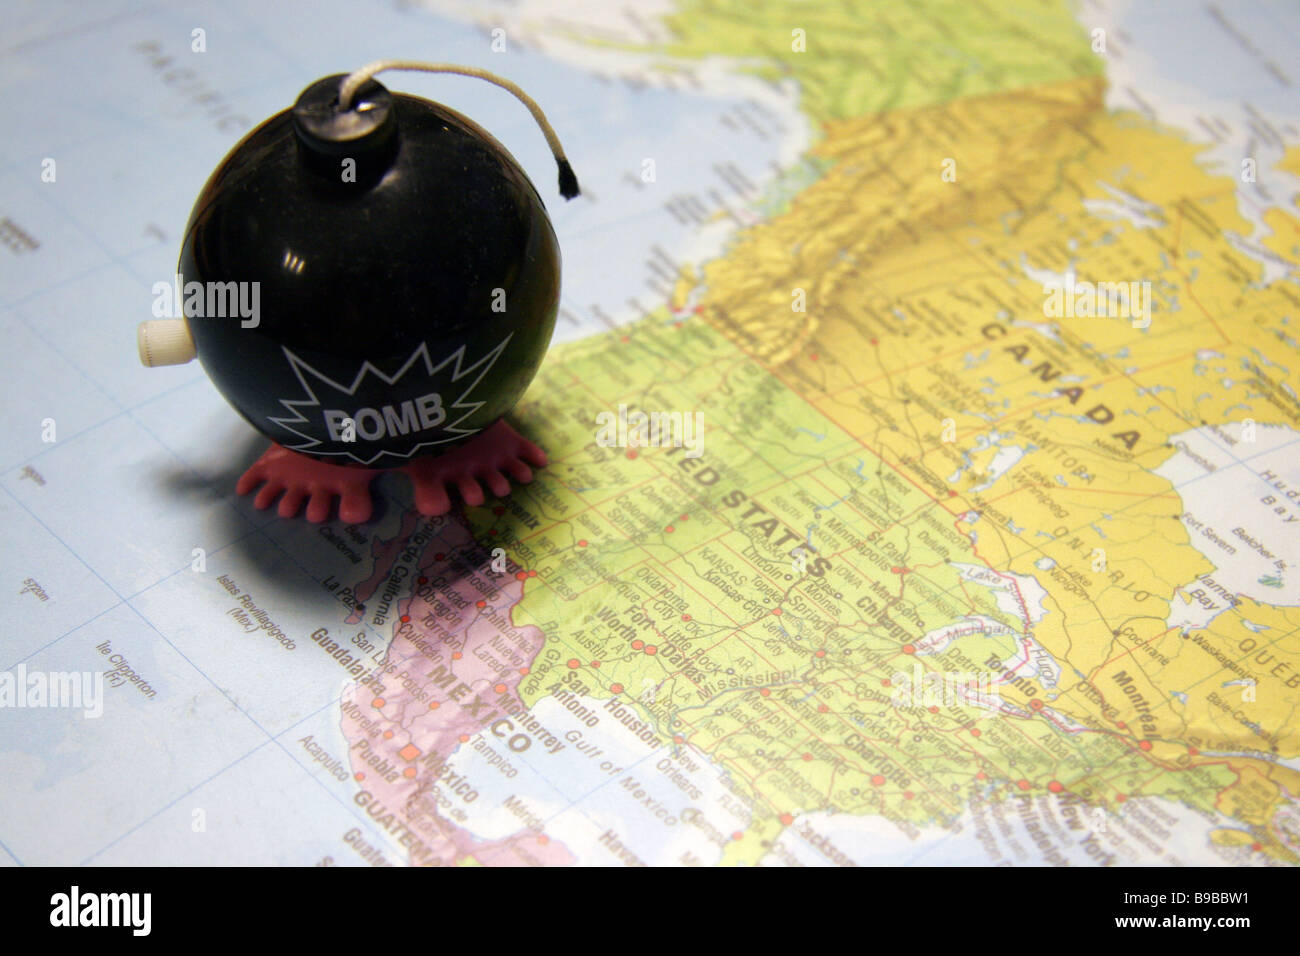 Toy bomb on map of North America Stock Photo